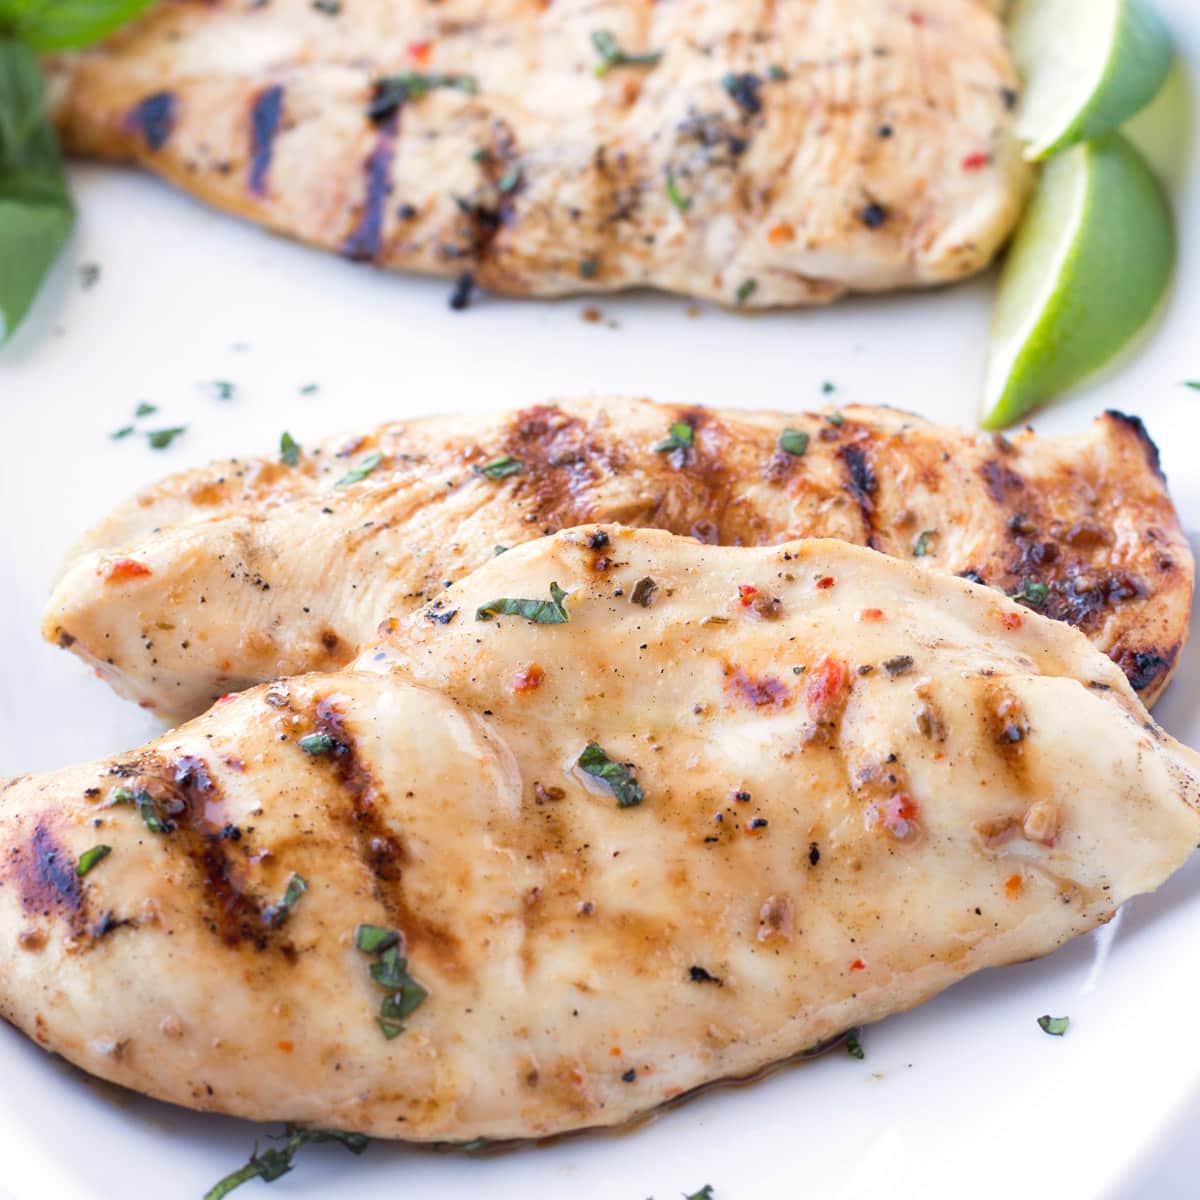 Grilled chicken on a platter with fresh herbs.